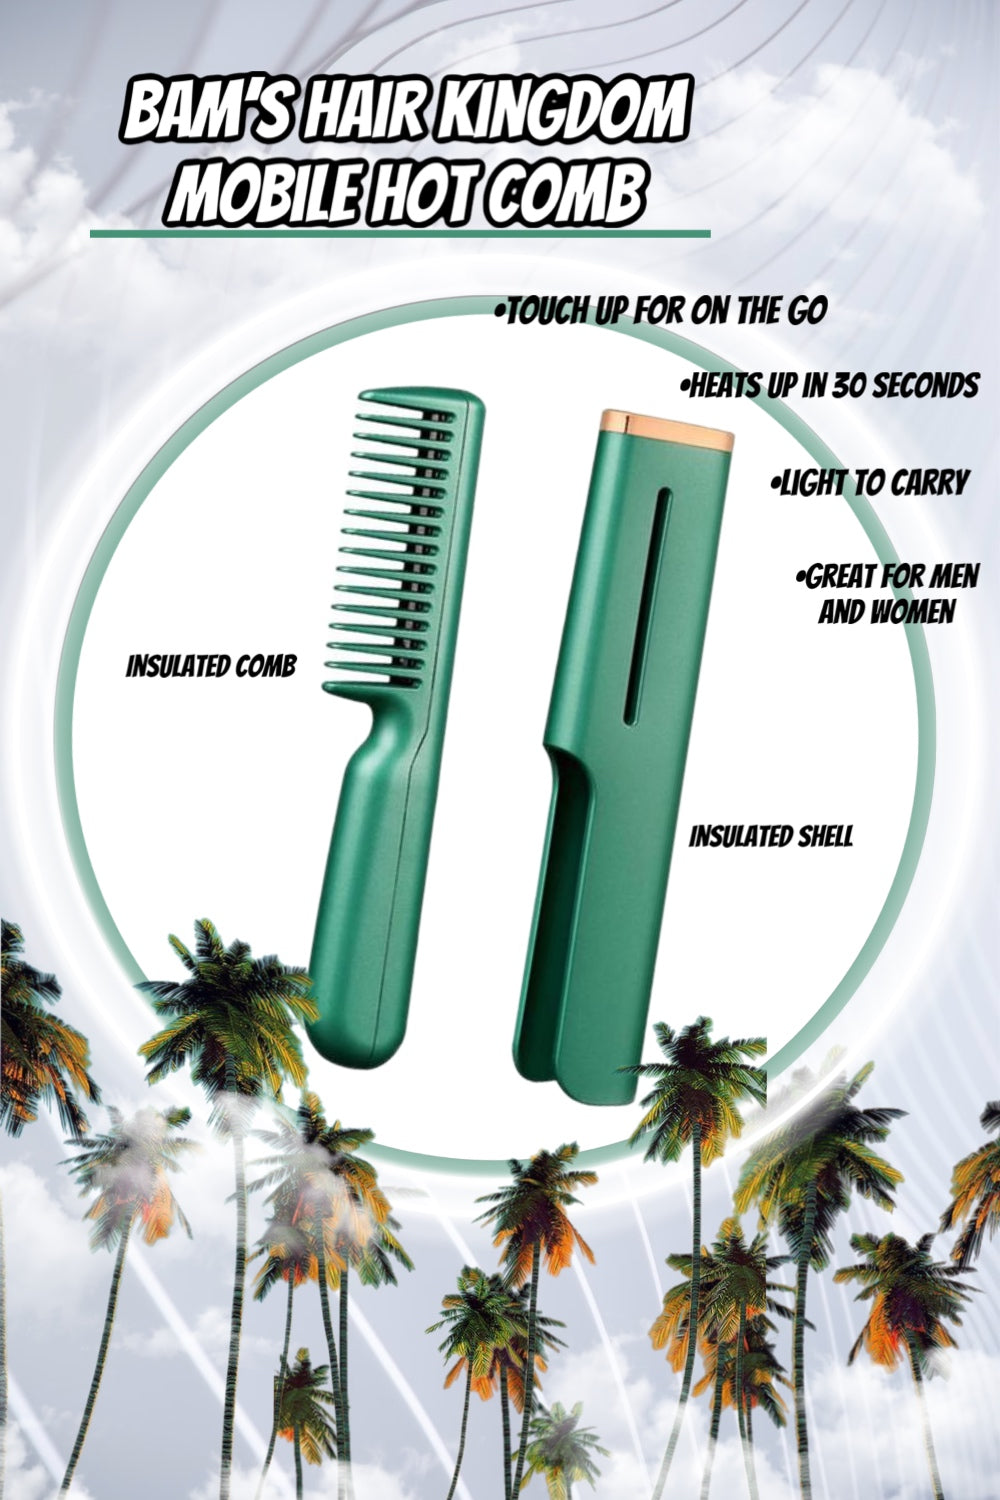 BHK mobile Hot Comb